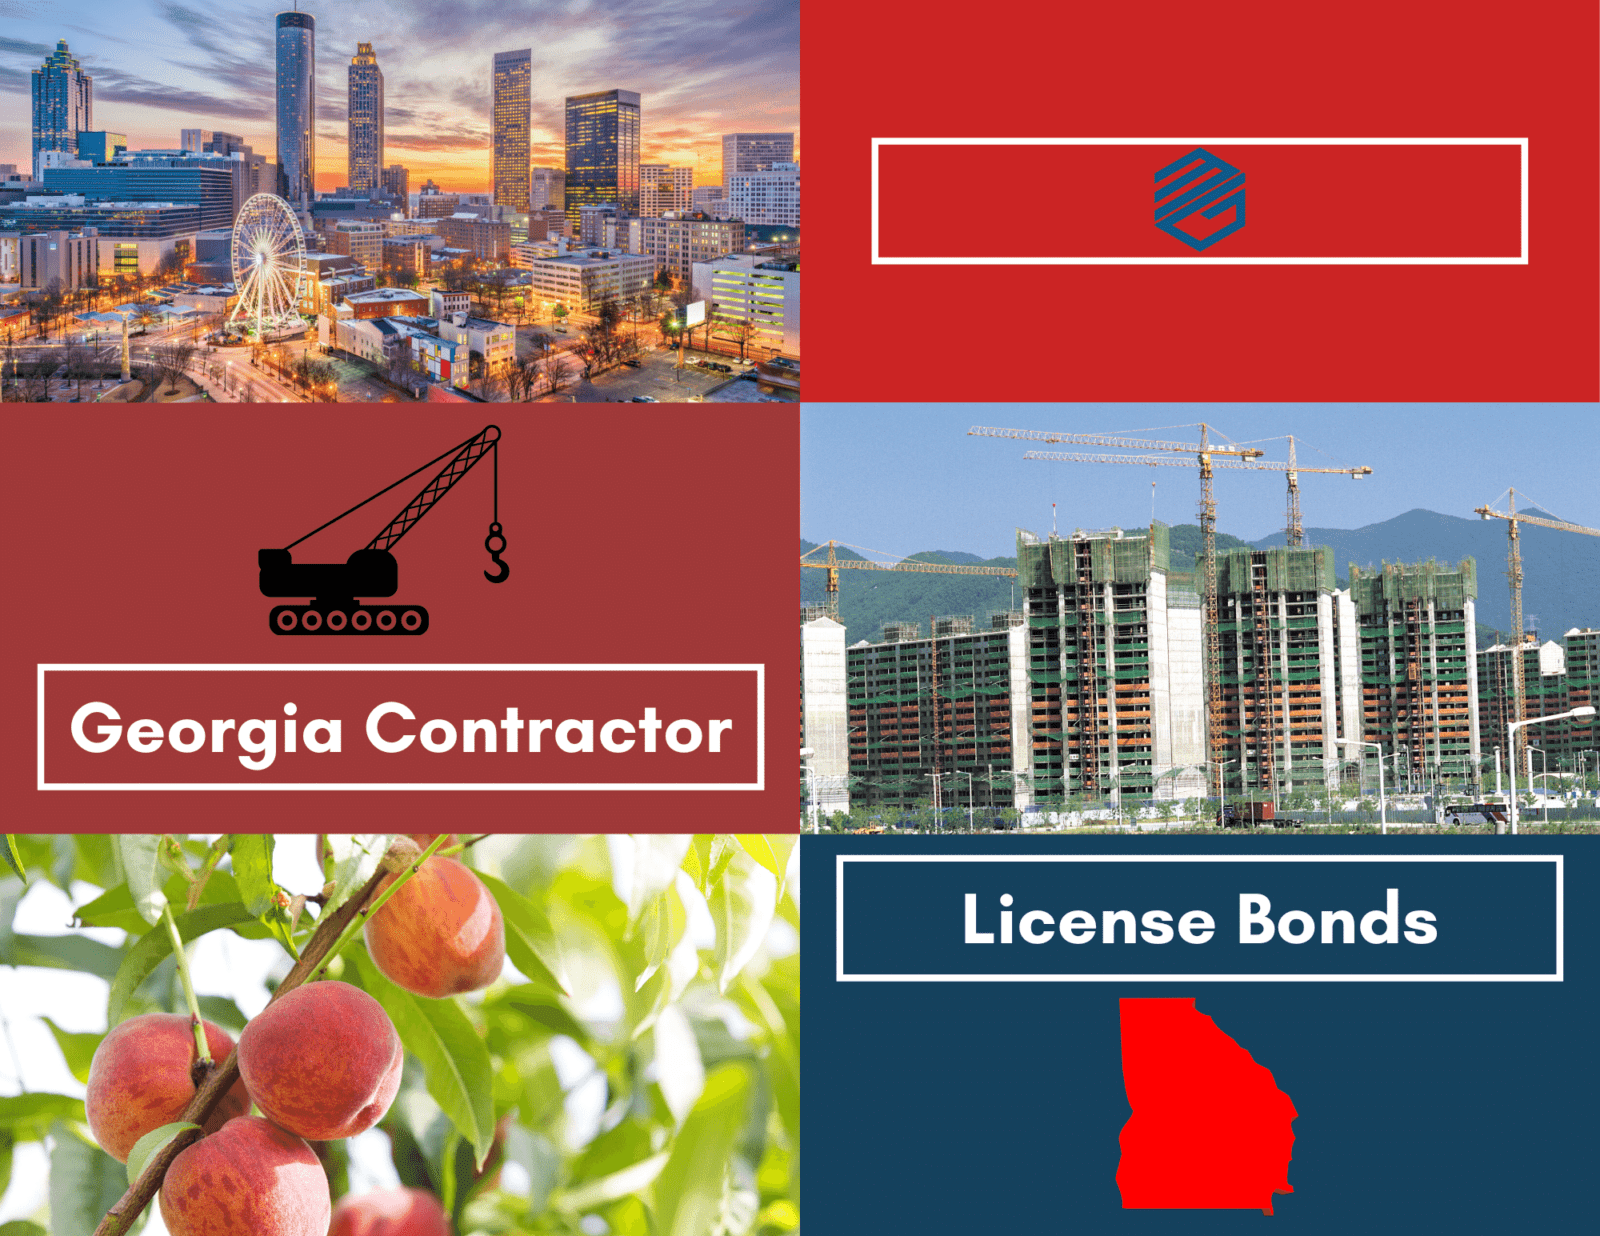 Georgia Contractor License Bonds - picture of Atlanta, picture of a Georgia Peach tree, a picture of a building under construction and the state of Georgia outline in red. Words Georgia Contractor License Bonds